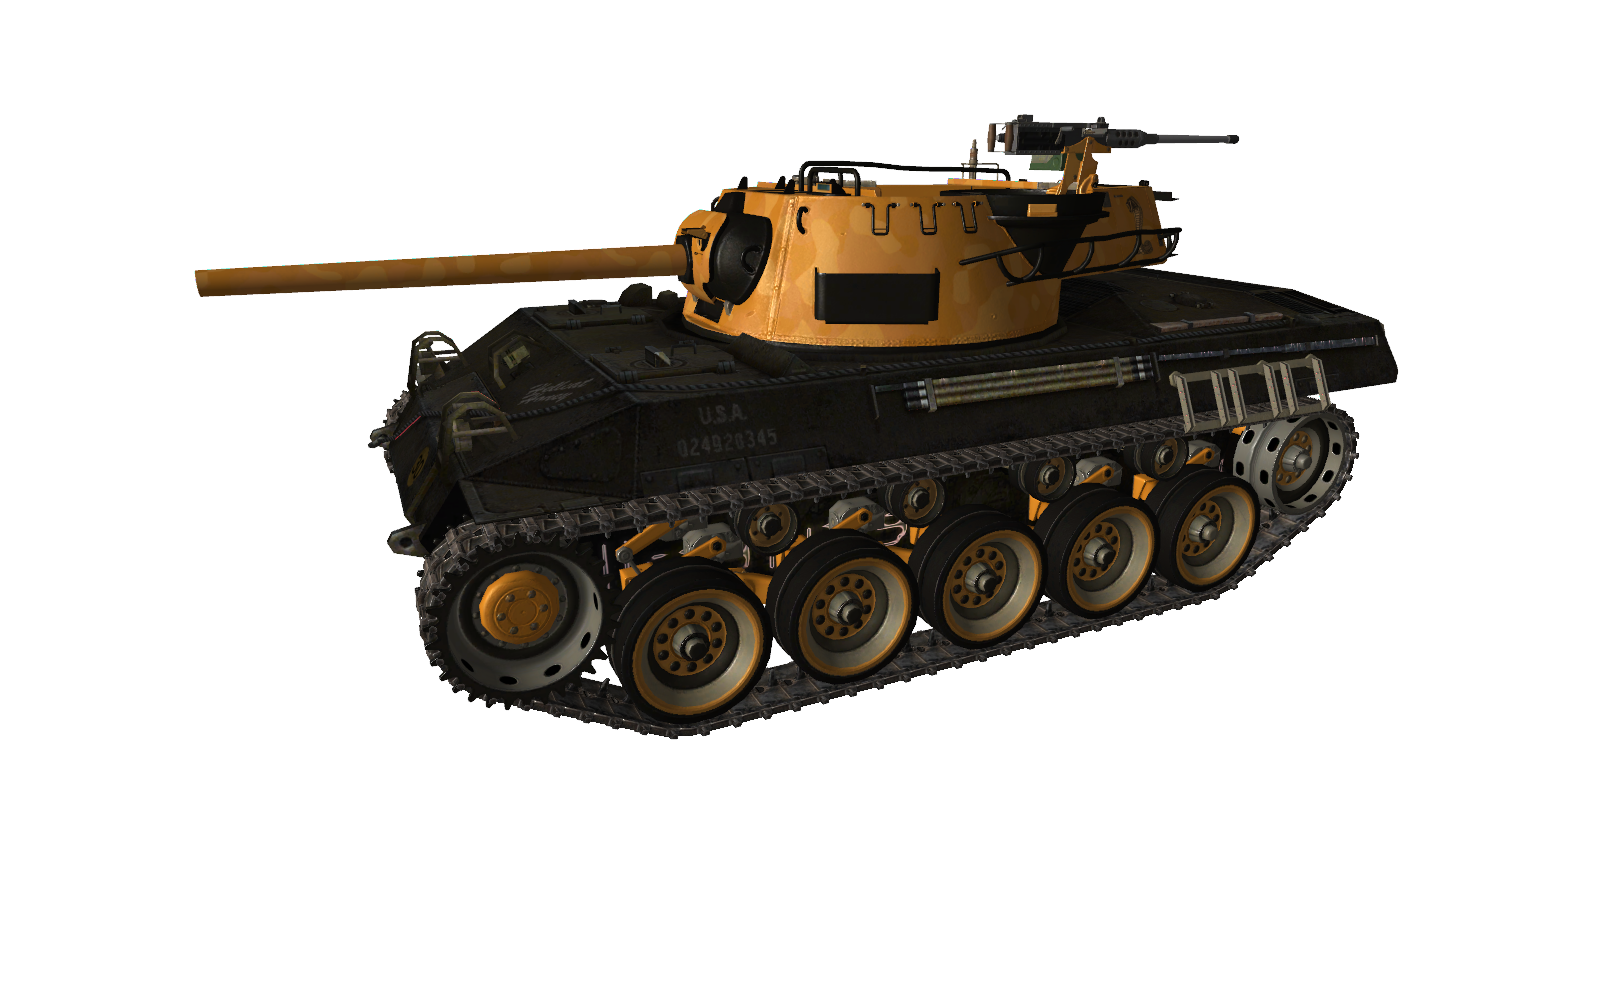 Abrams tank PNG image, armore